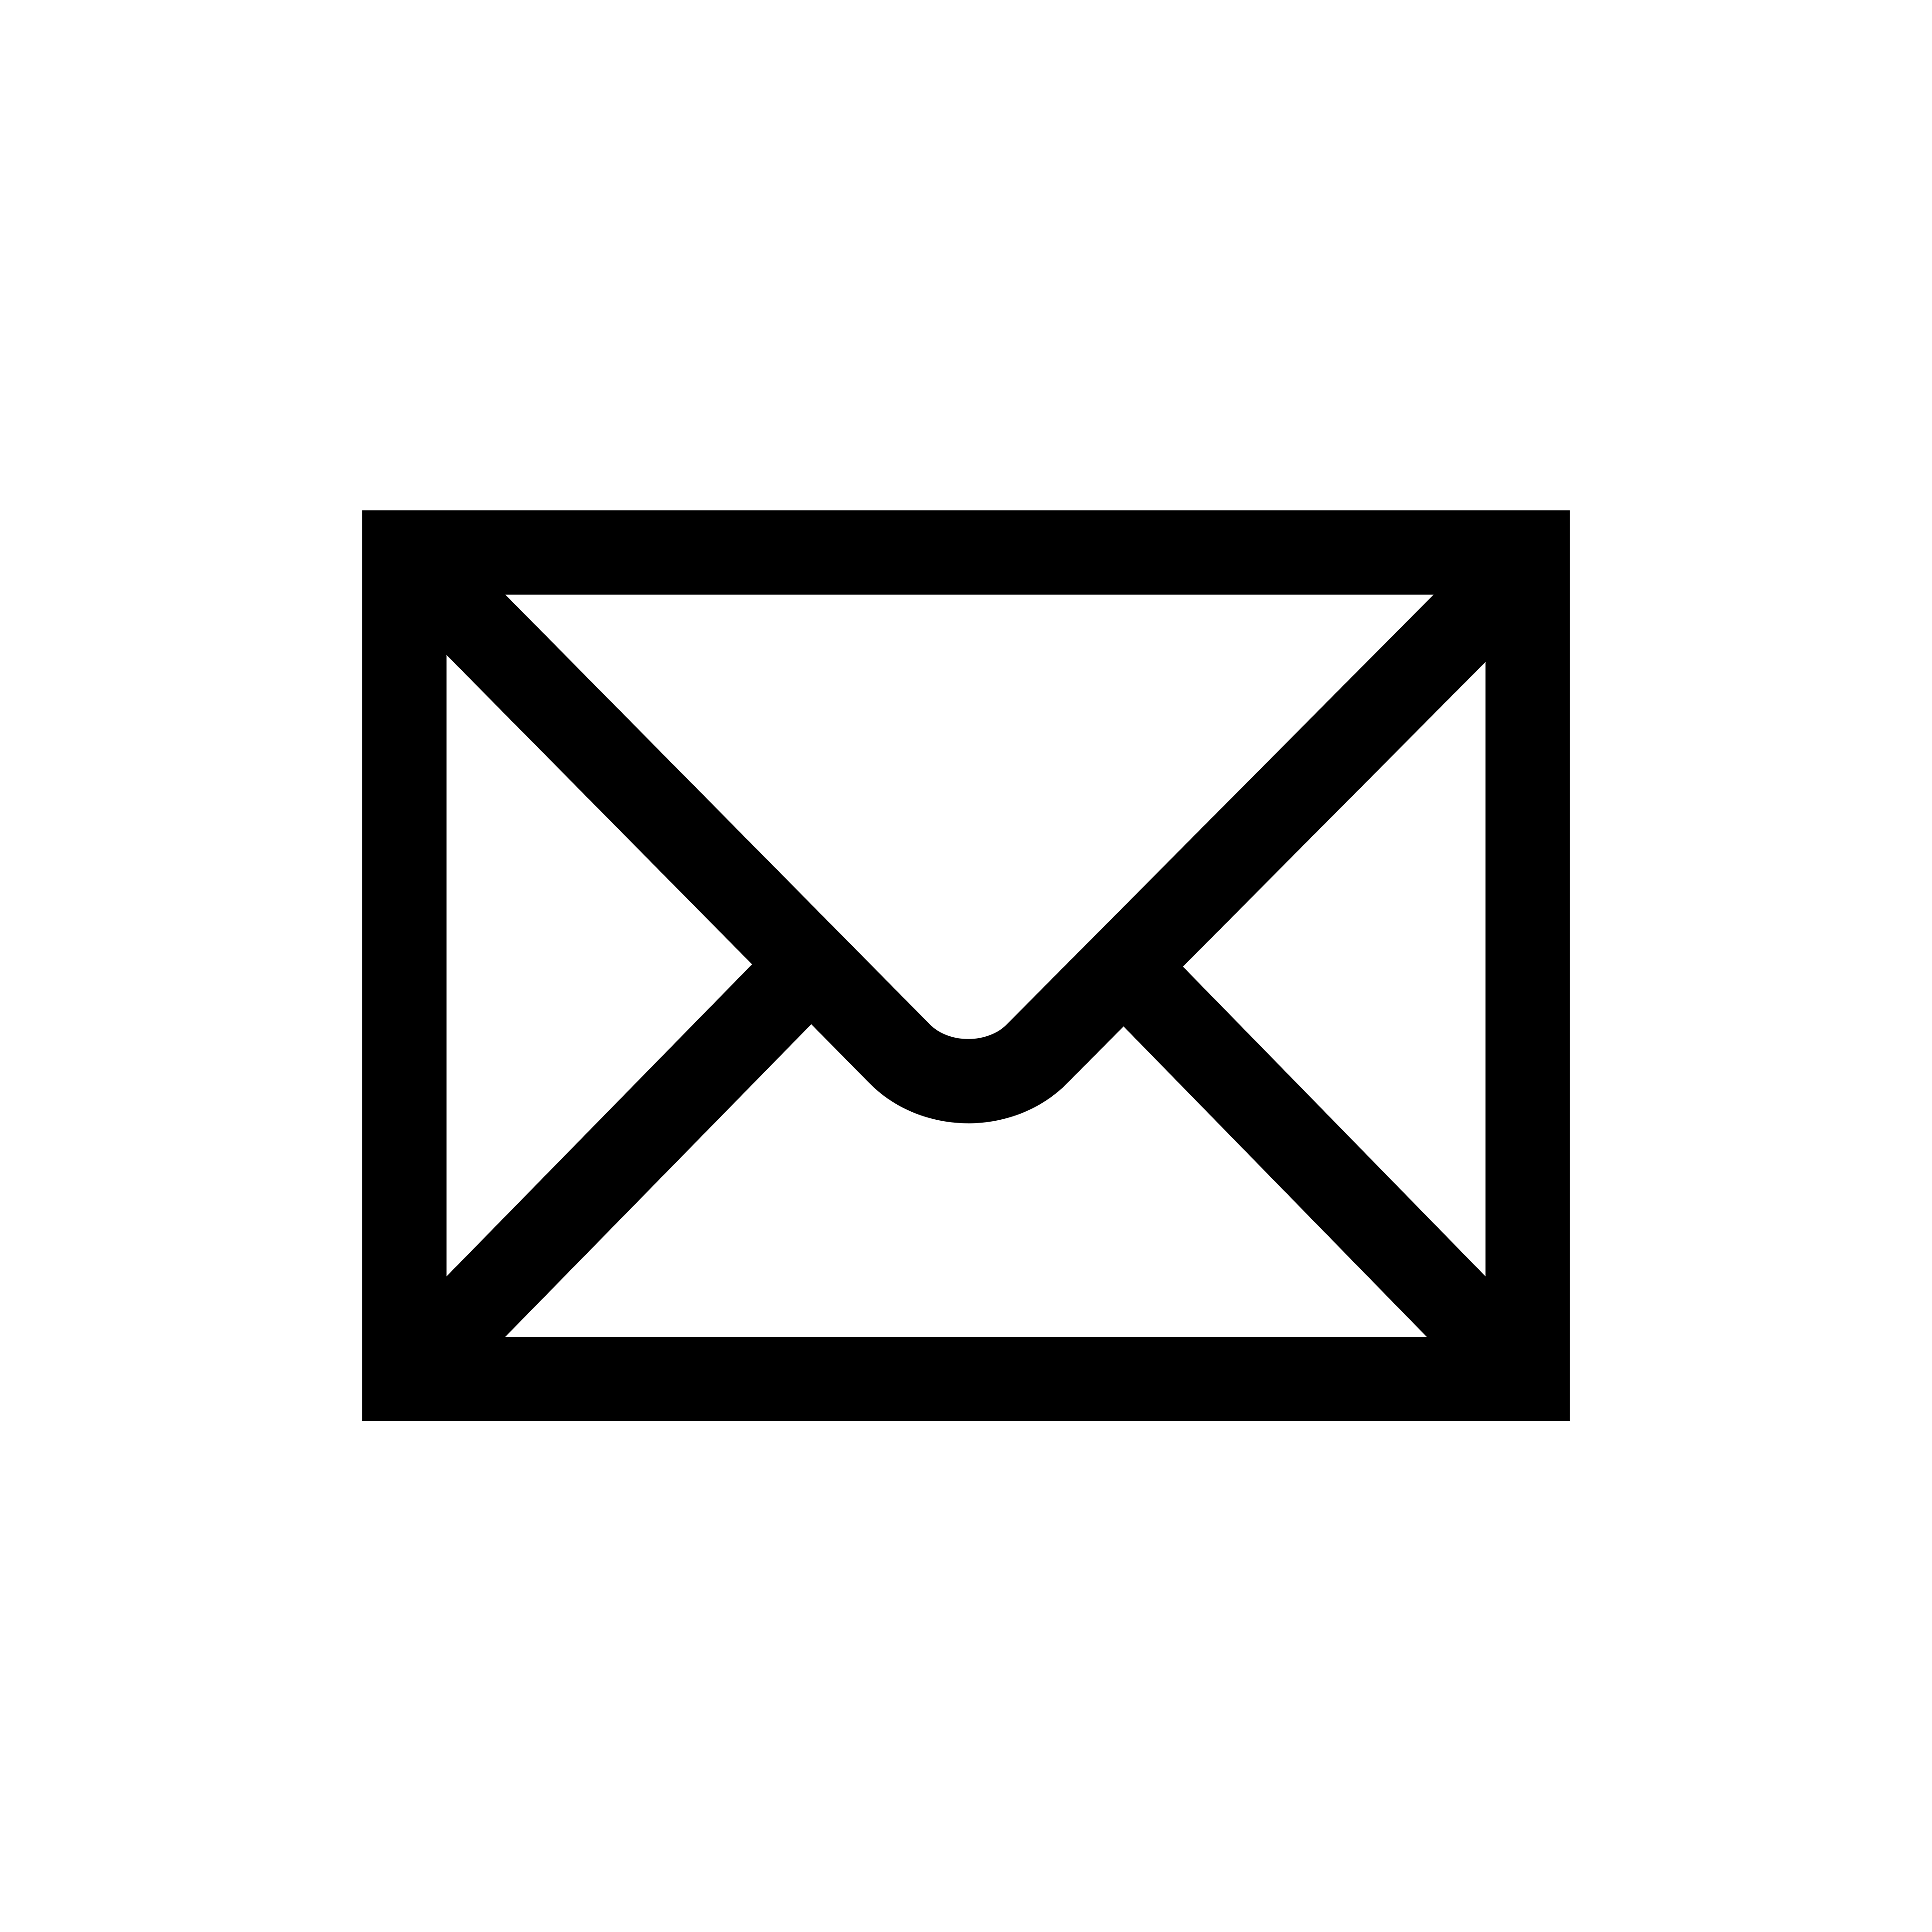 Small Email Logo - Small Email Logo Png Images